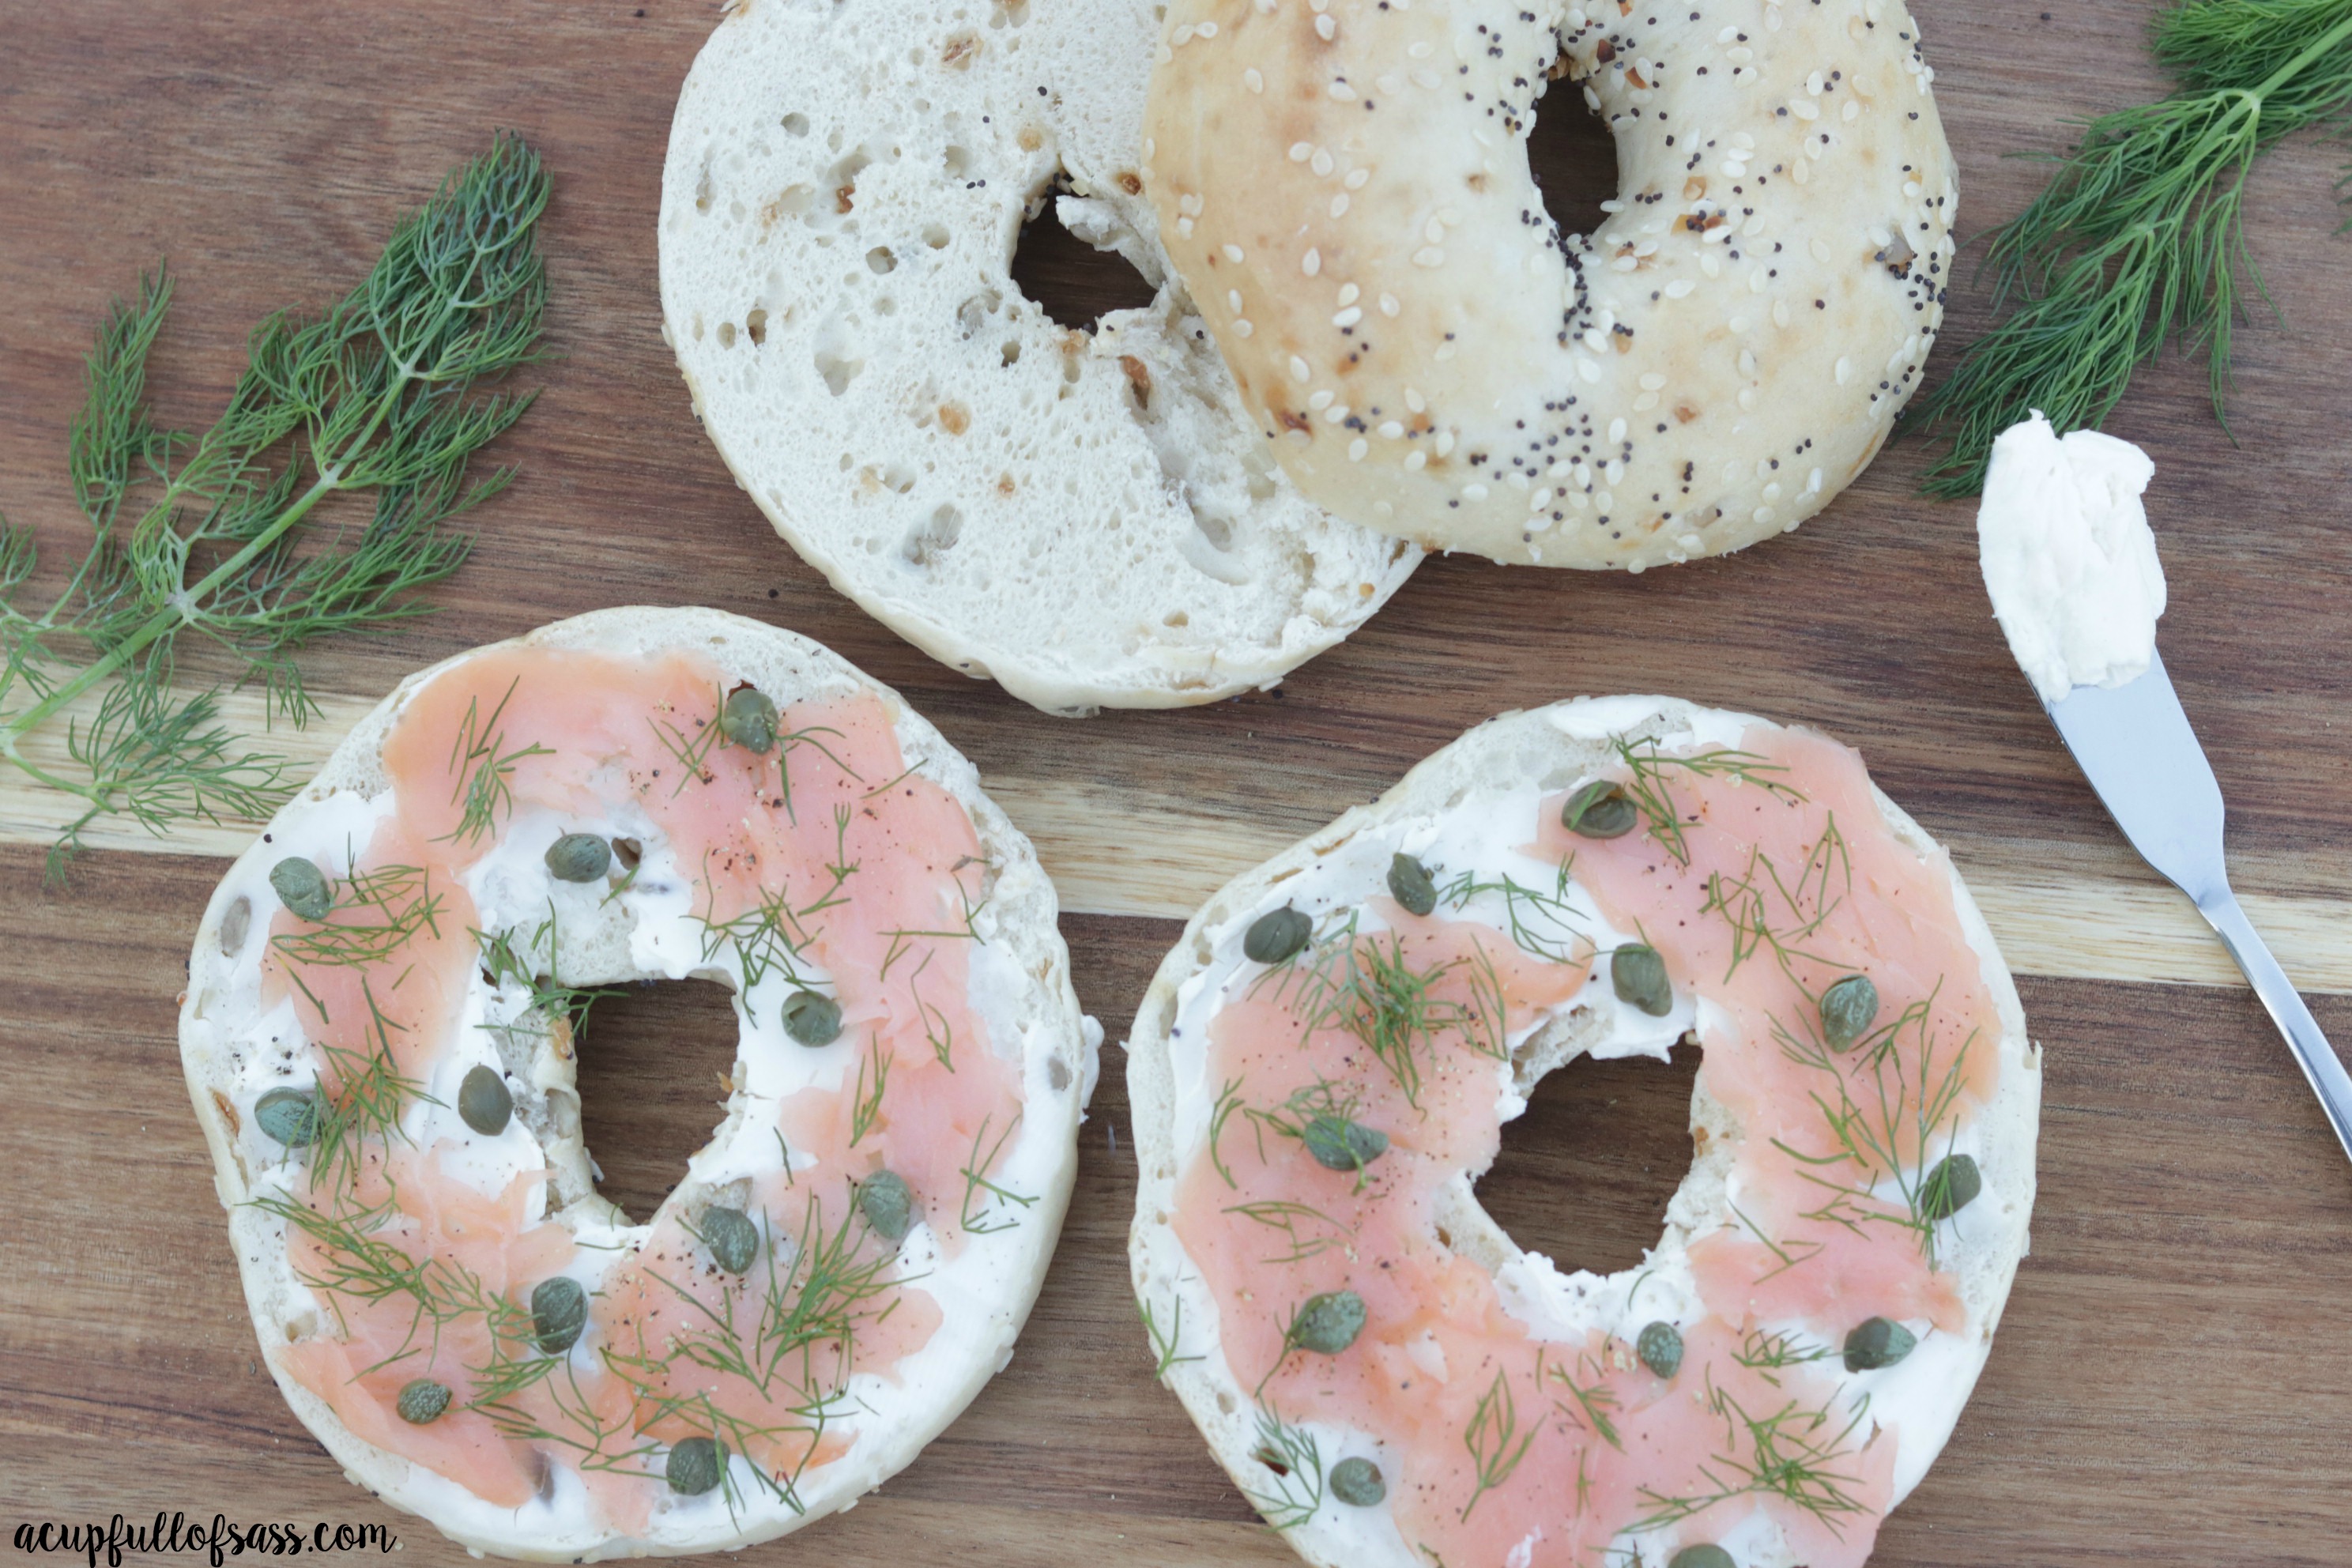 everything-bagel-with-lox-cream-cheese-fresh-dill-and-capers